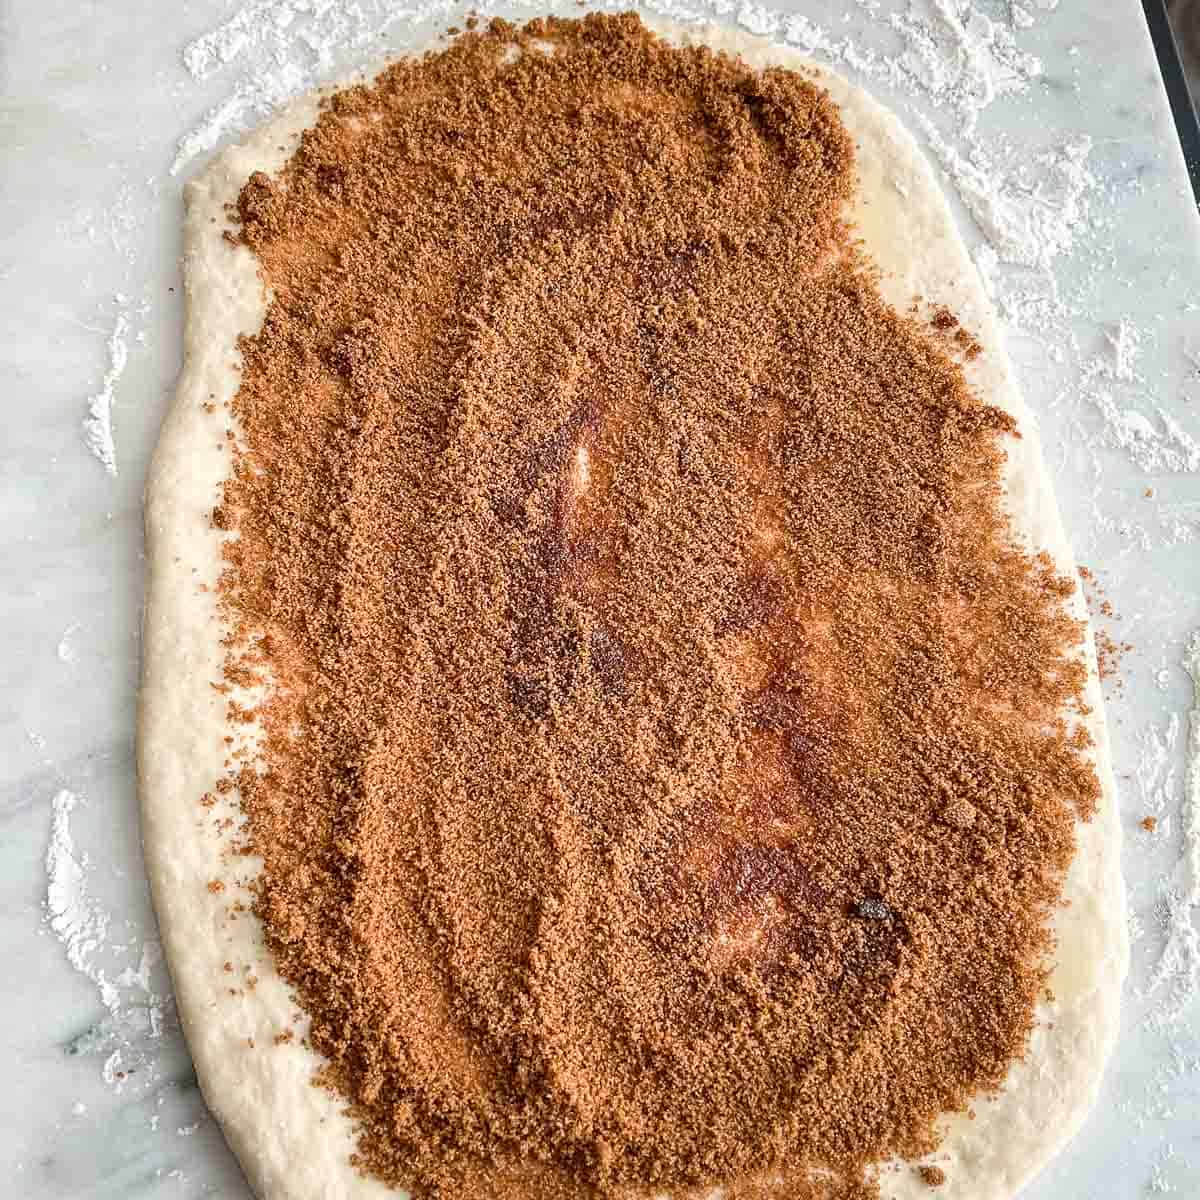 Cinnamon roll filling spread out on top of rolled out dough.